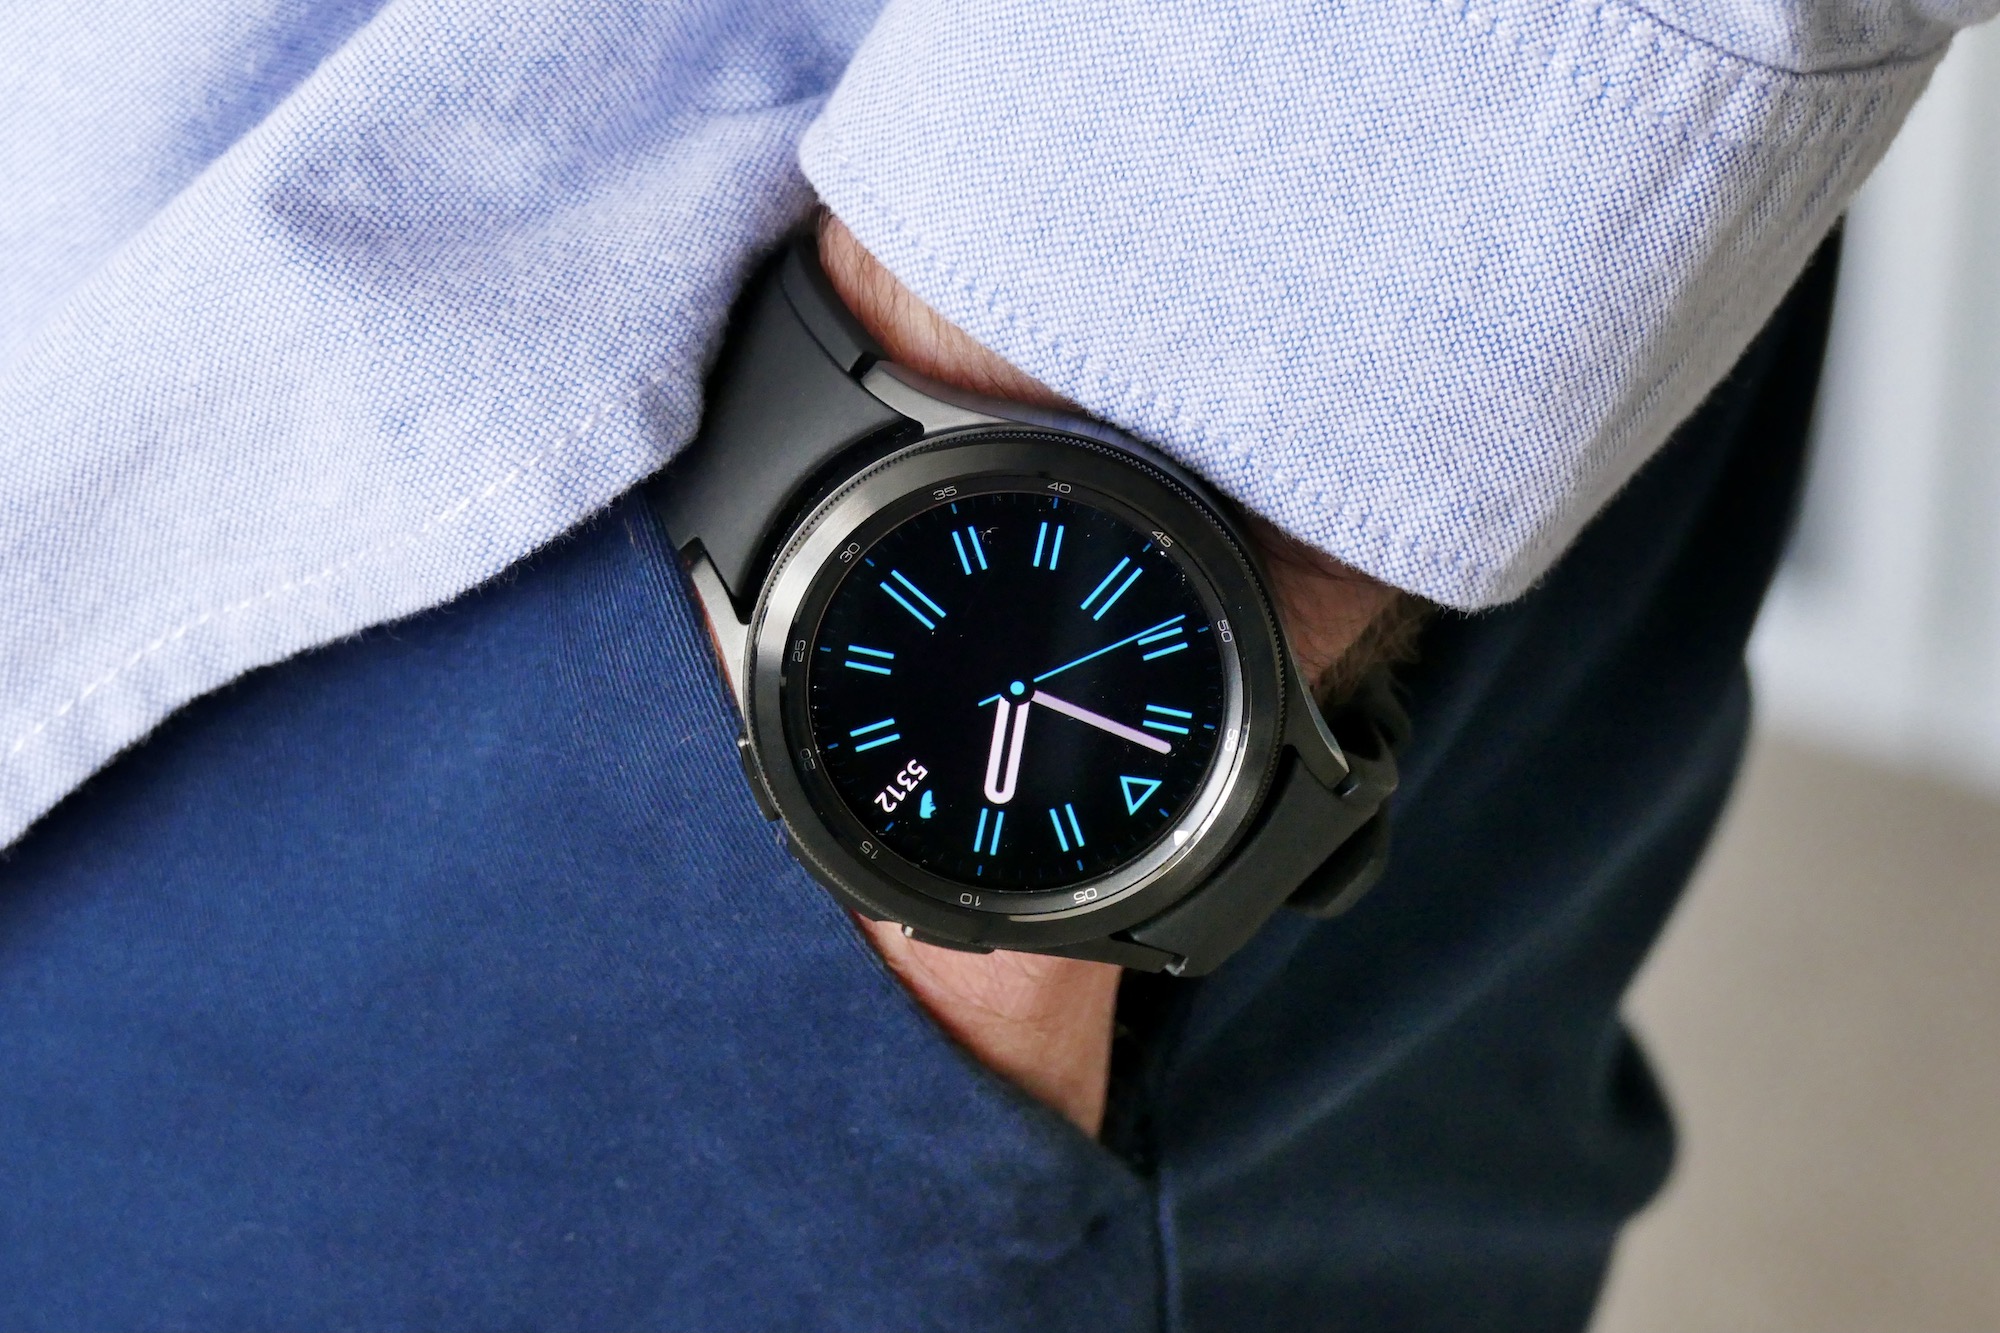 Samsung Galaxy Watch 4 Classic Review: The Best Health Monitoring